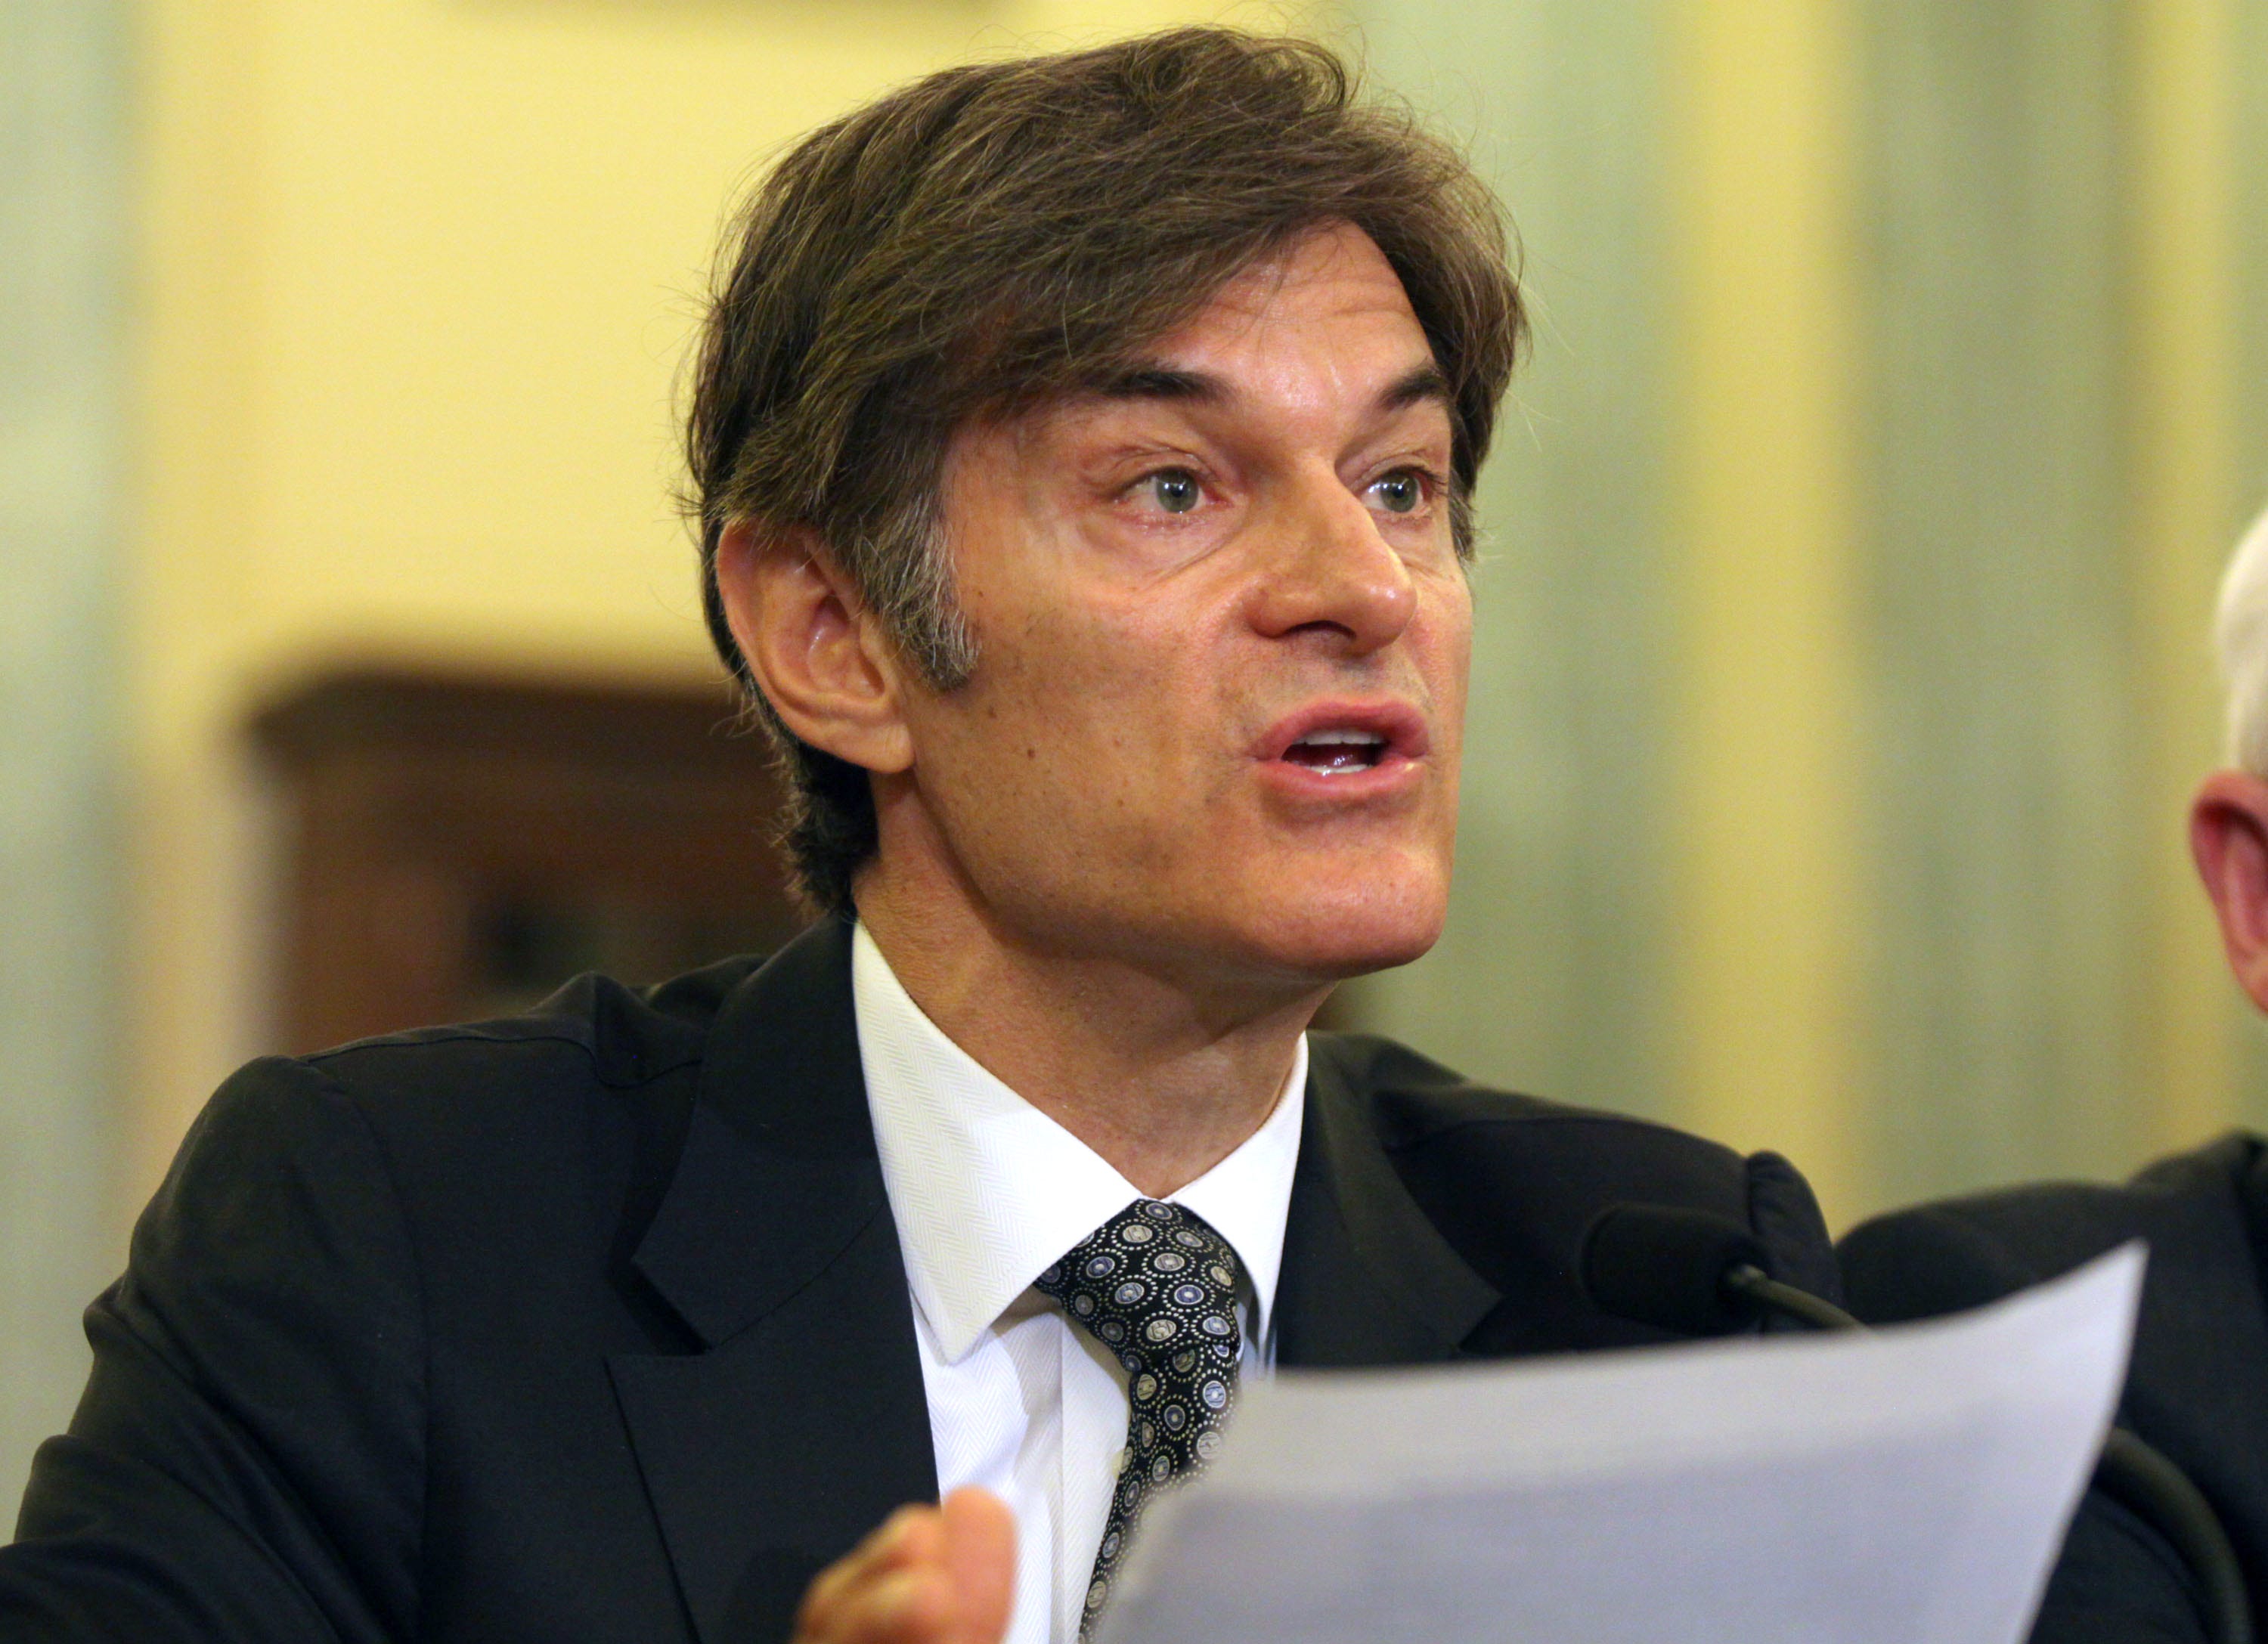 Columbia University College Of Physicians And Surgeons - Delaware's Dr. Oz is angry, ready to fight his critics